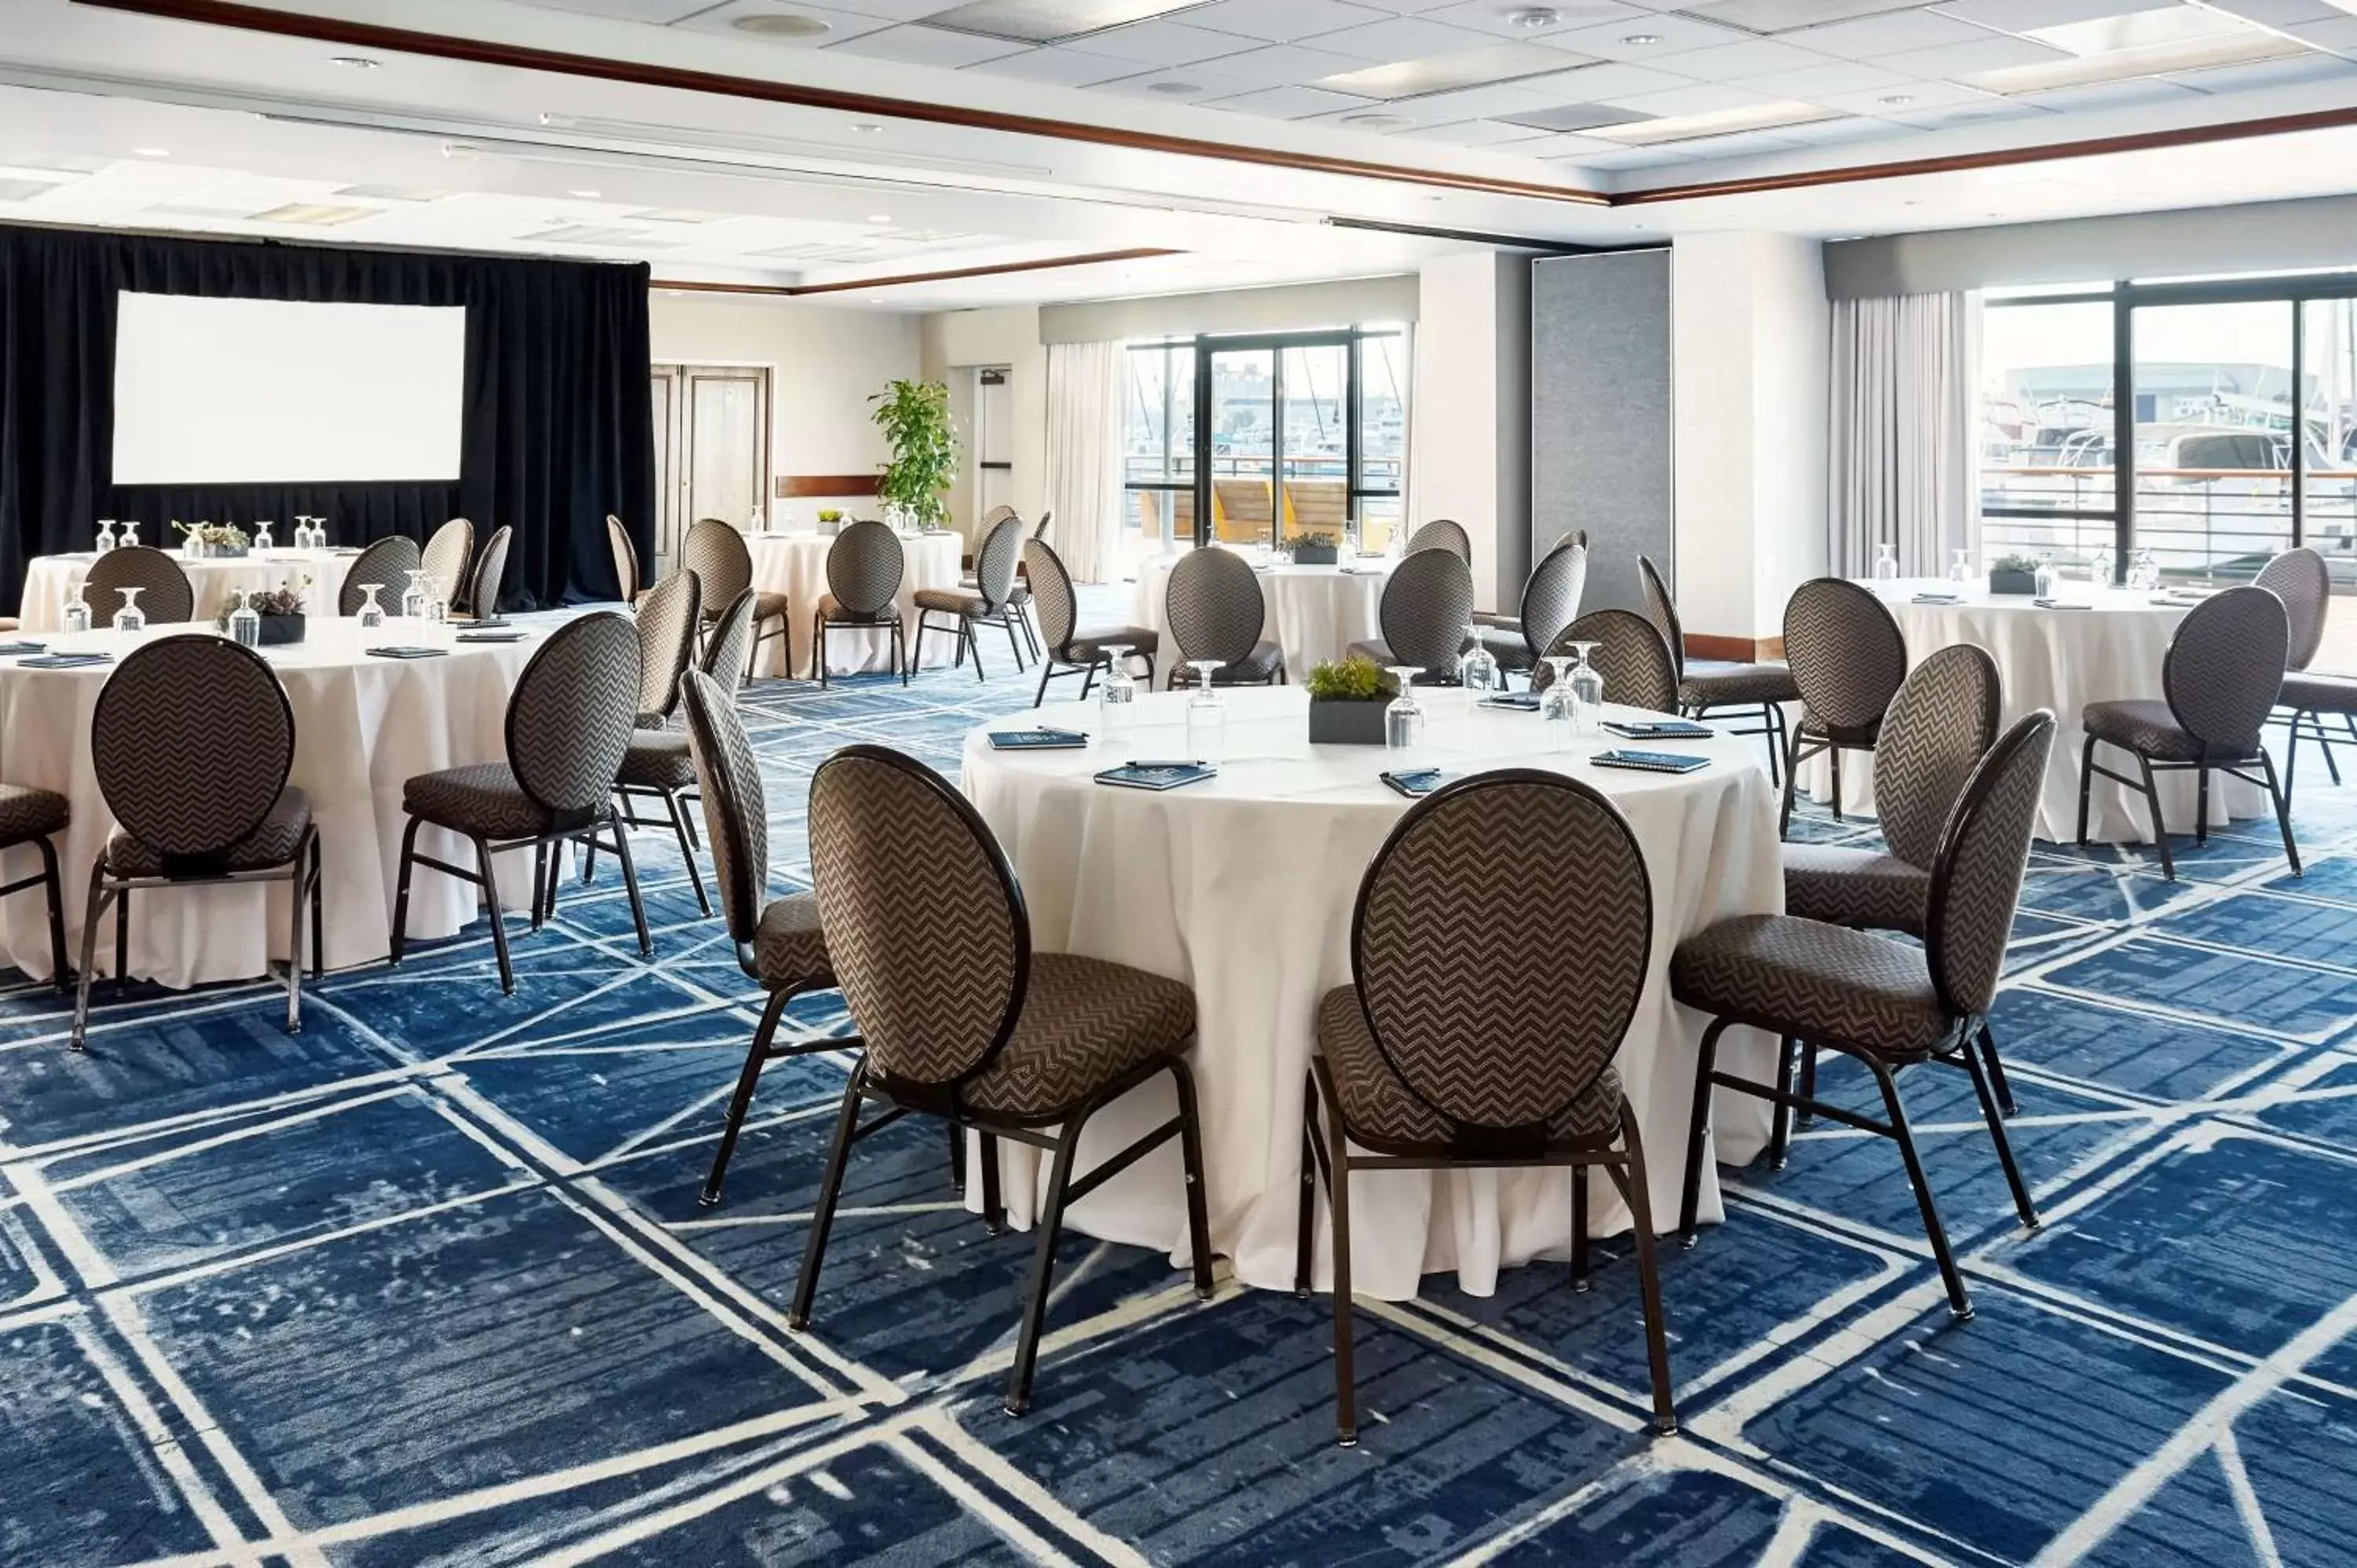 Banquet/Function facilities in Waterfront Hotel, part of JdV by Hyatt